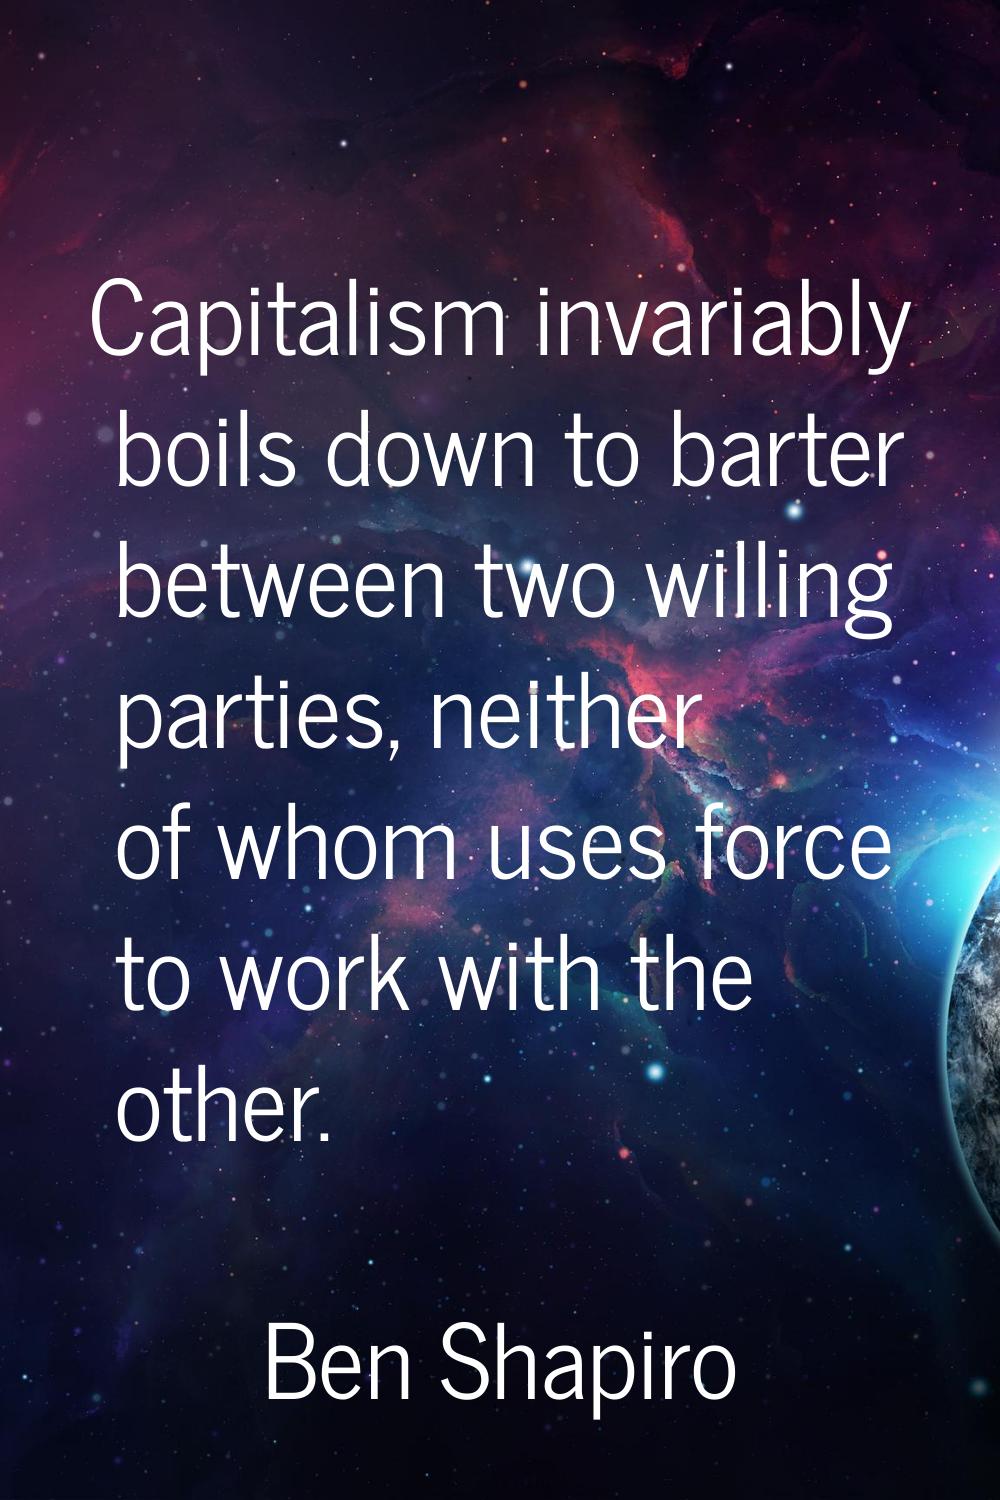 Capitalism invariably boils down to barter between two willing parties, neither of whom uses force 